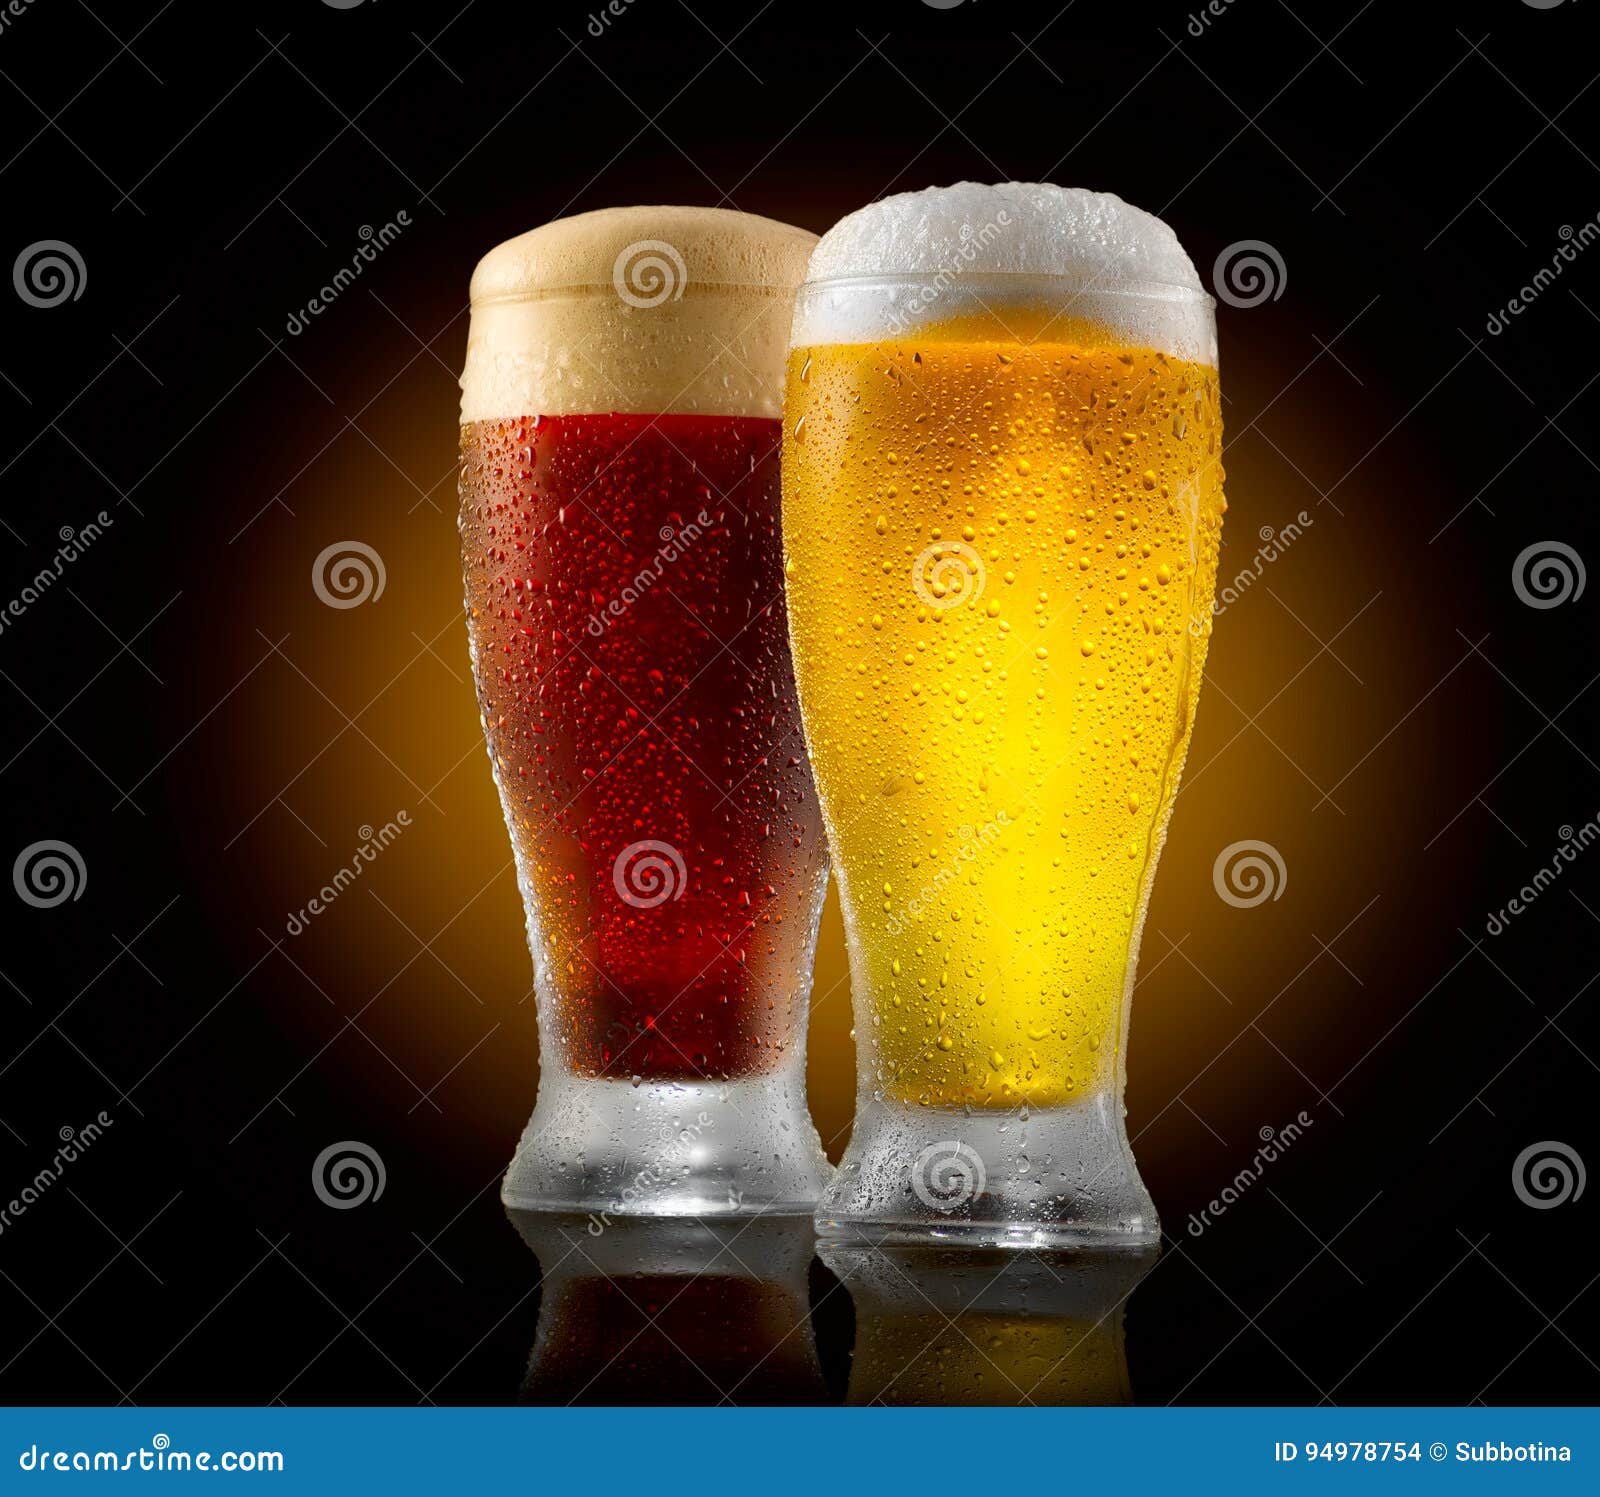 craft beer. two glasses of cold light and dark beer  on black